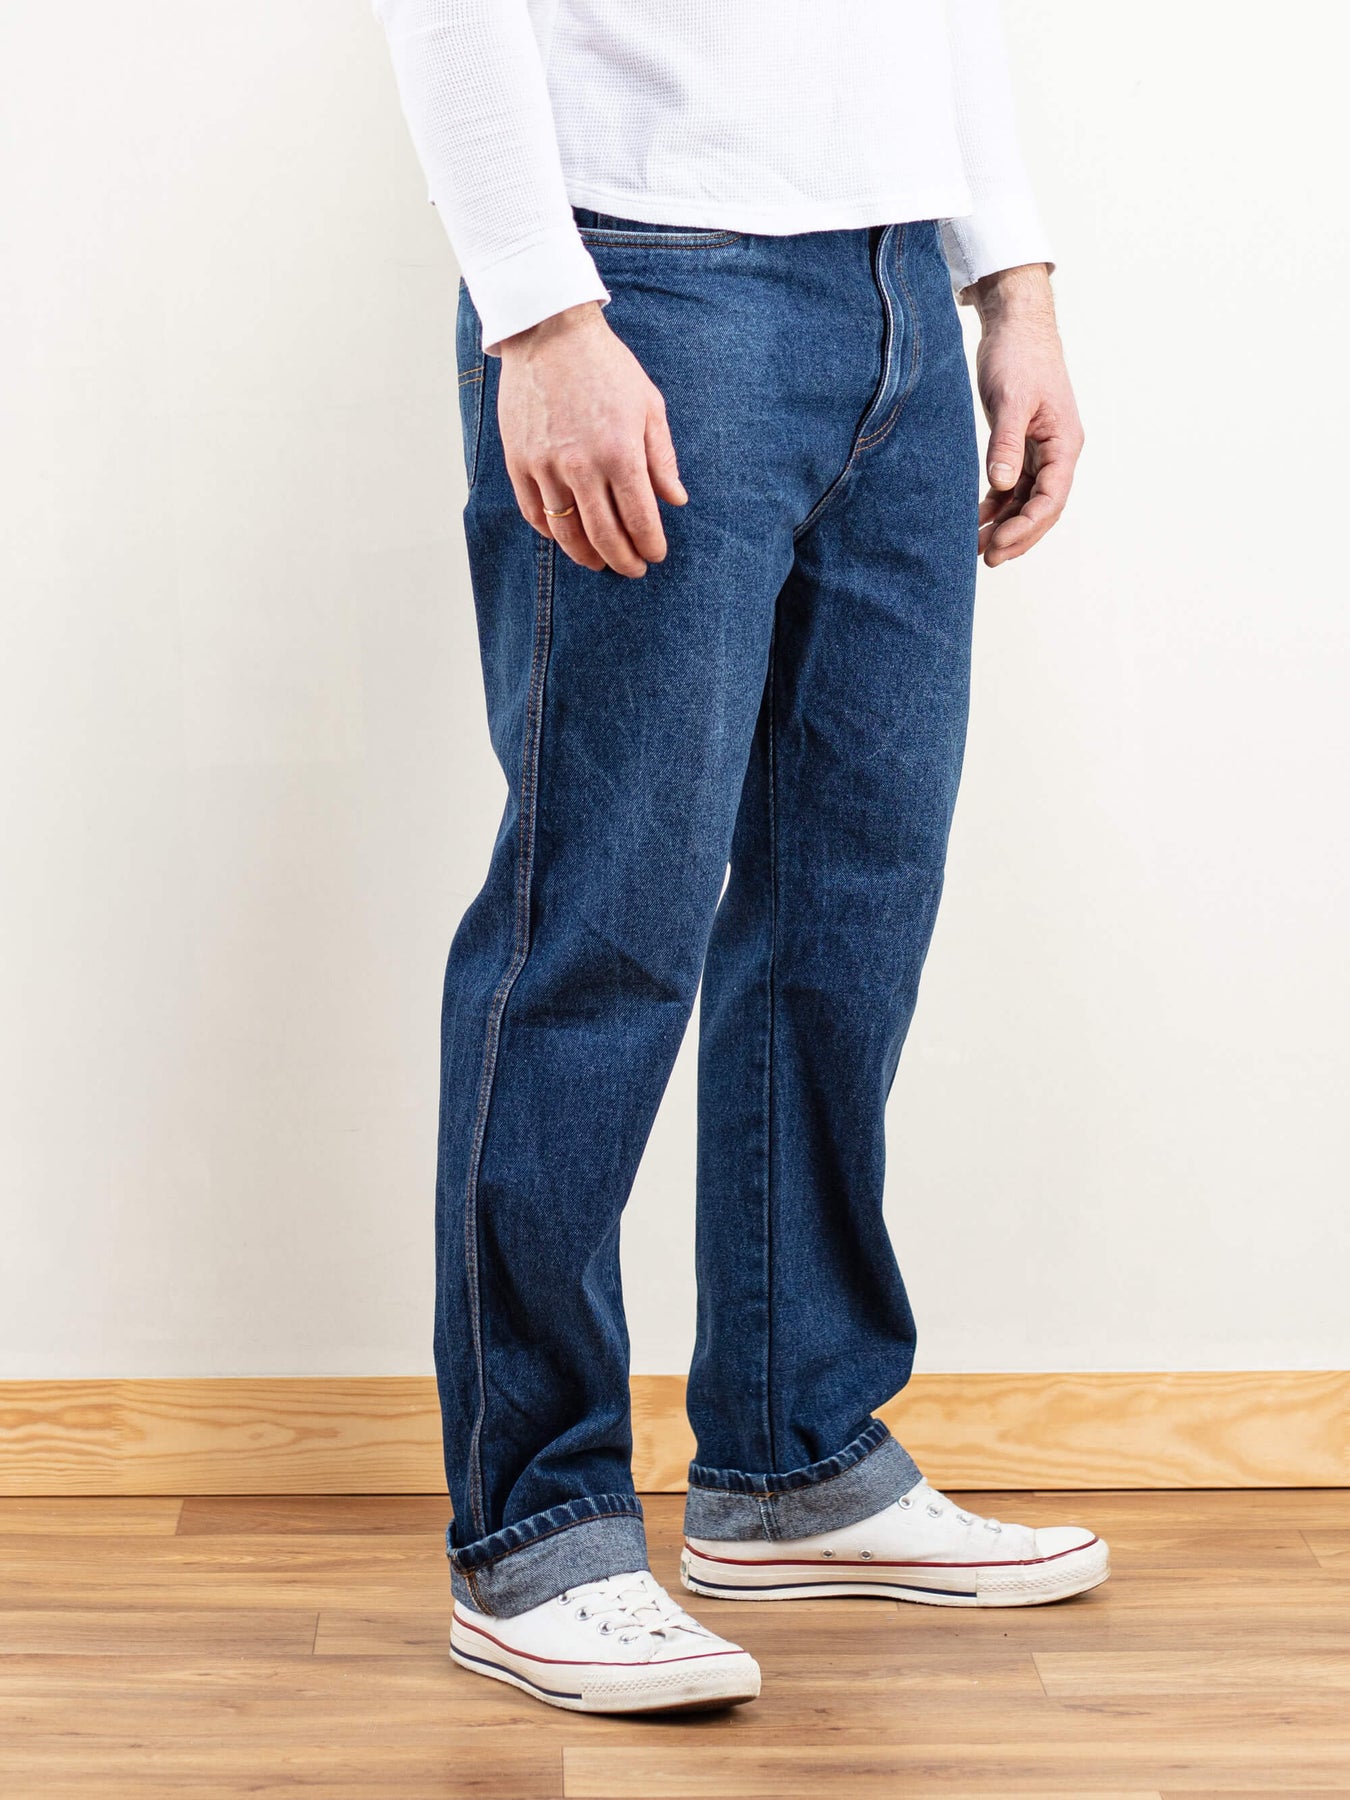 Mens - Vintage Straight Jeans in Franklin Mid Blue